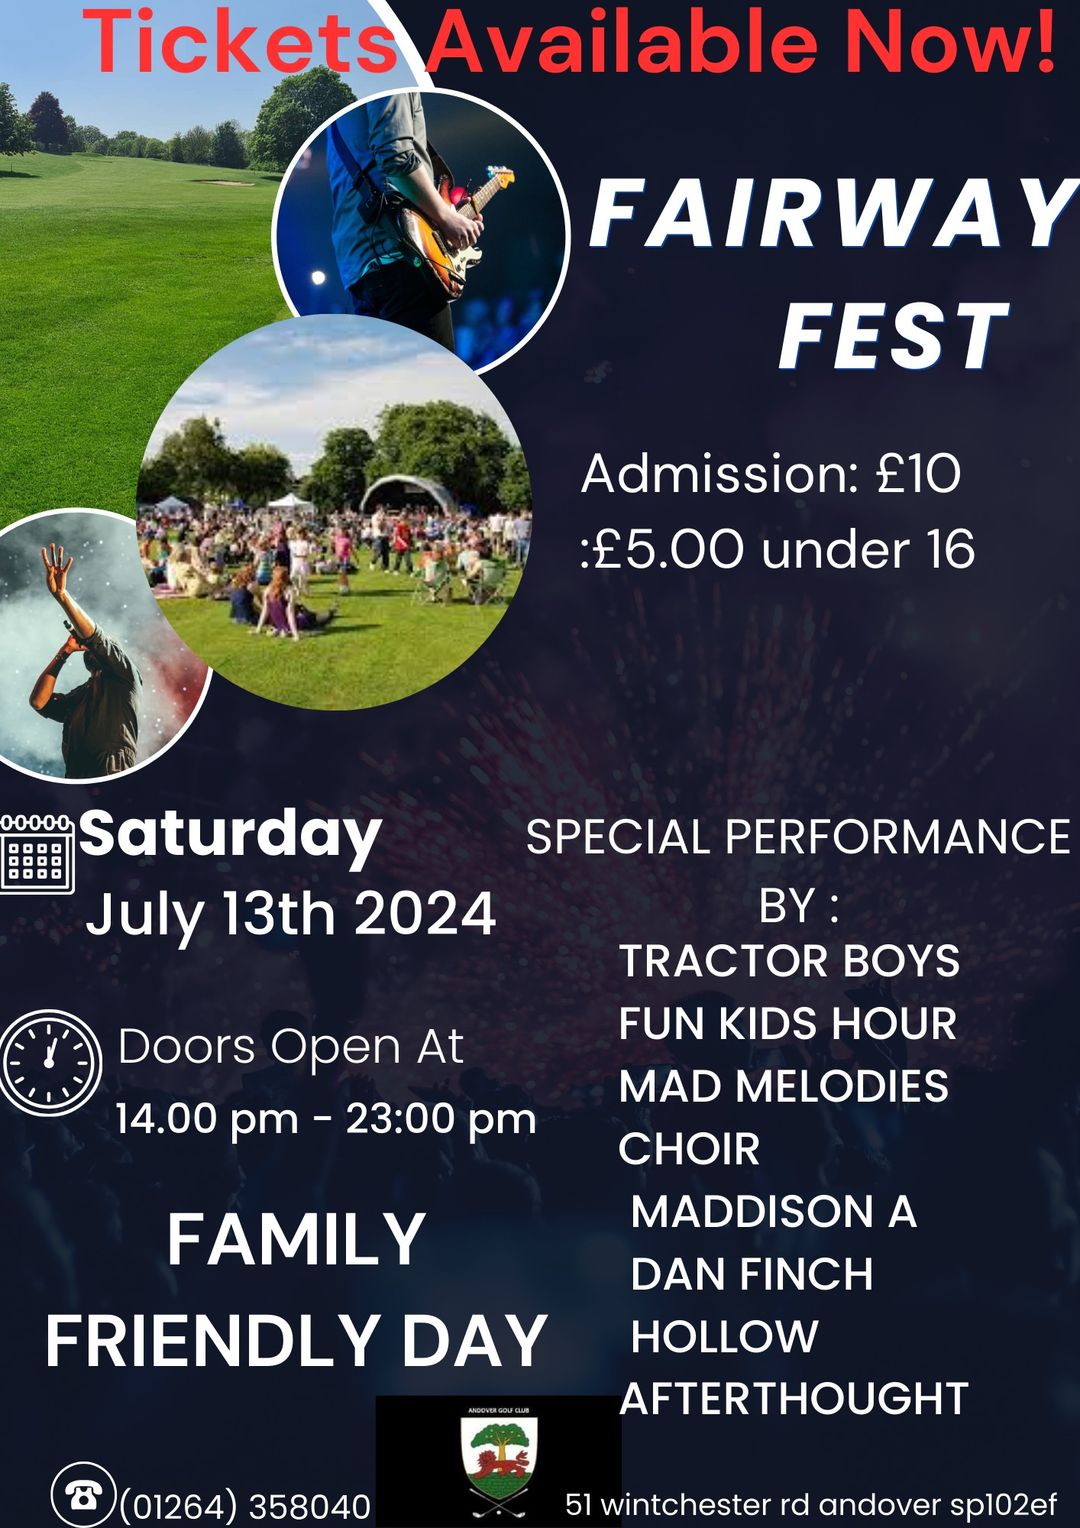 Fairway Fest: Tractor Boys + Fun Kids Hour + Mad Melodies + Choir + Maddison A + Dan Finch + Hollow + Afterthought